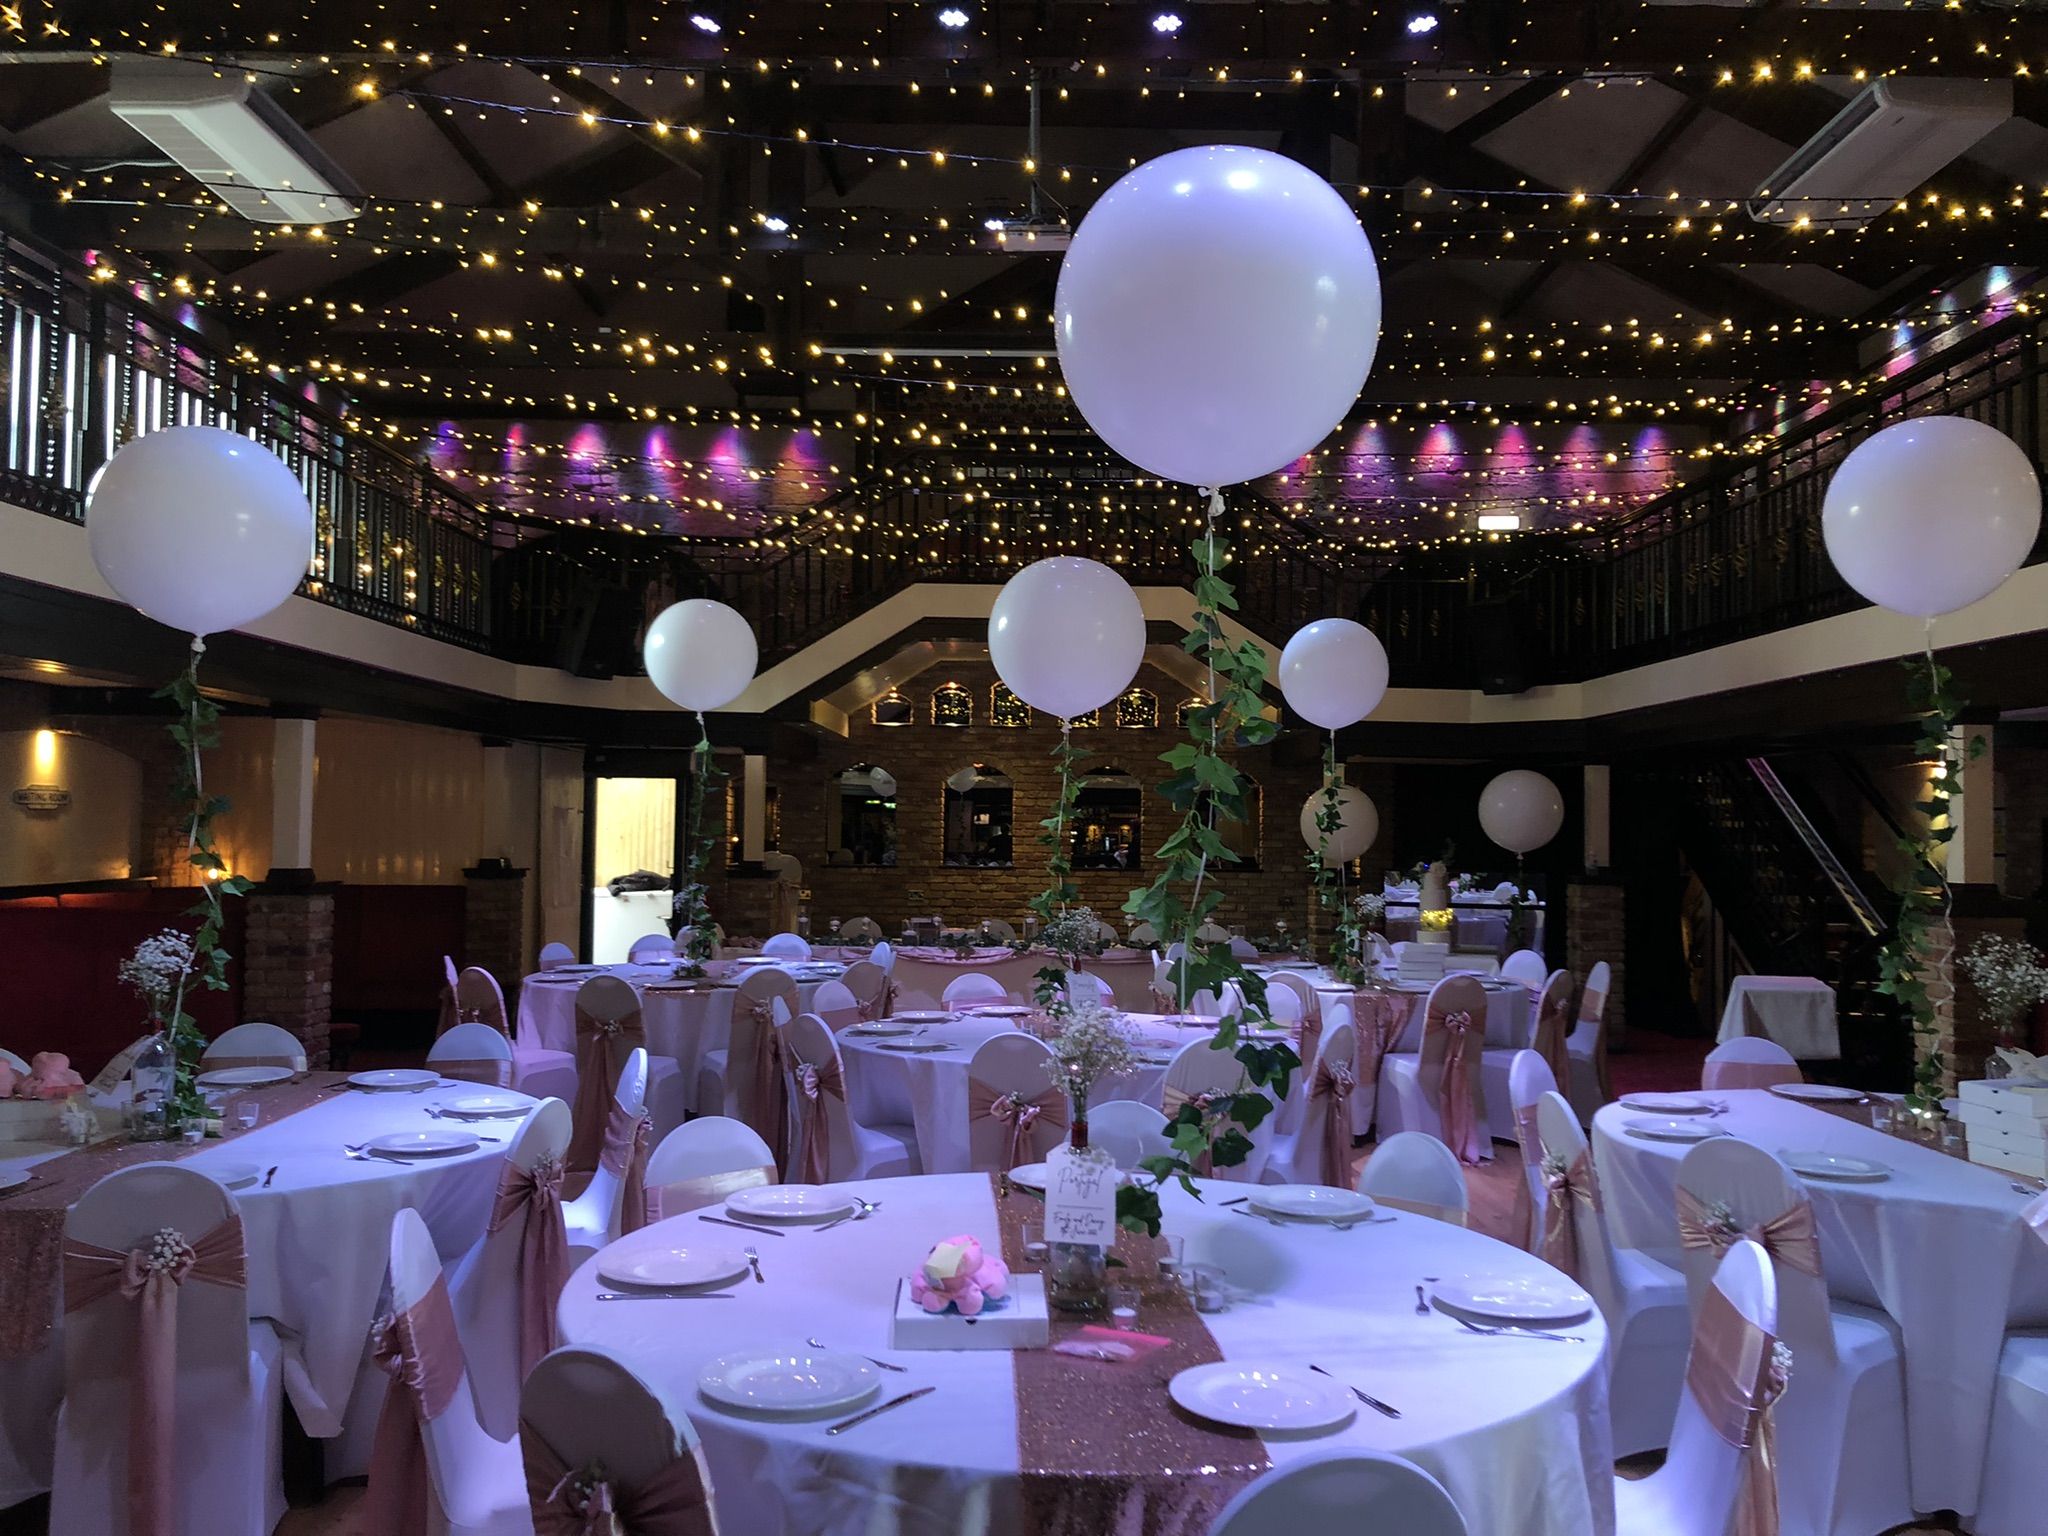 a banquet hall decorated with white and pink decorations.